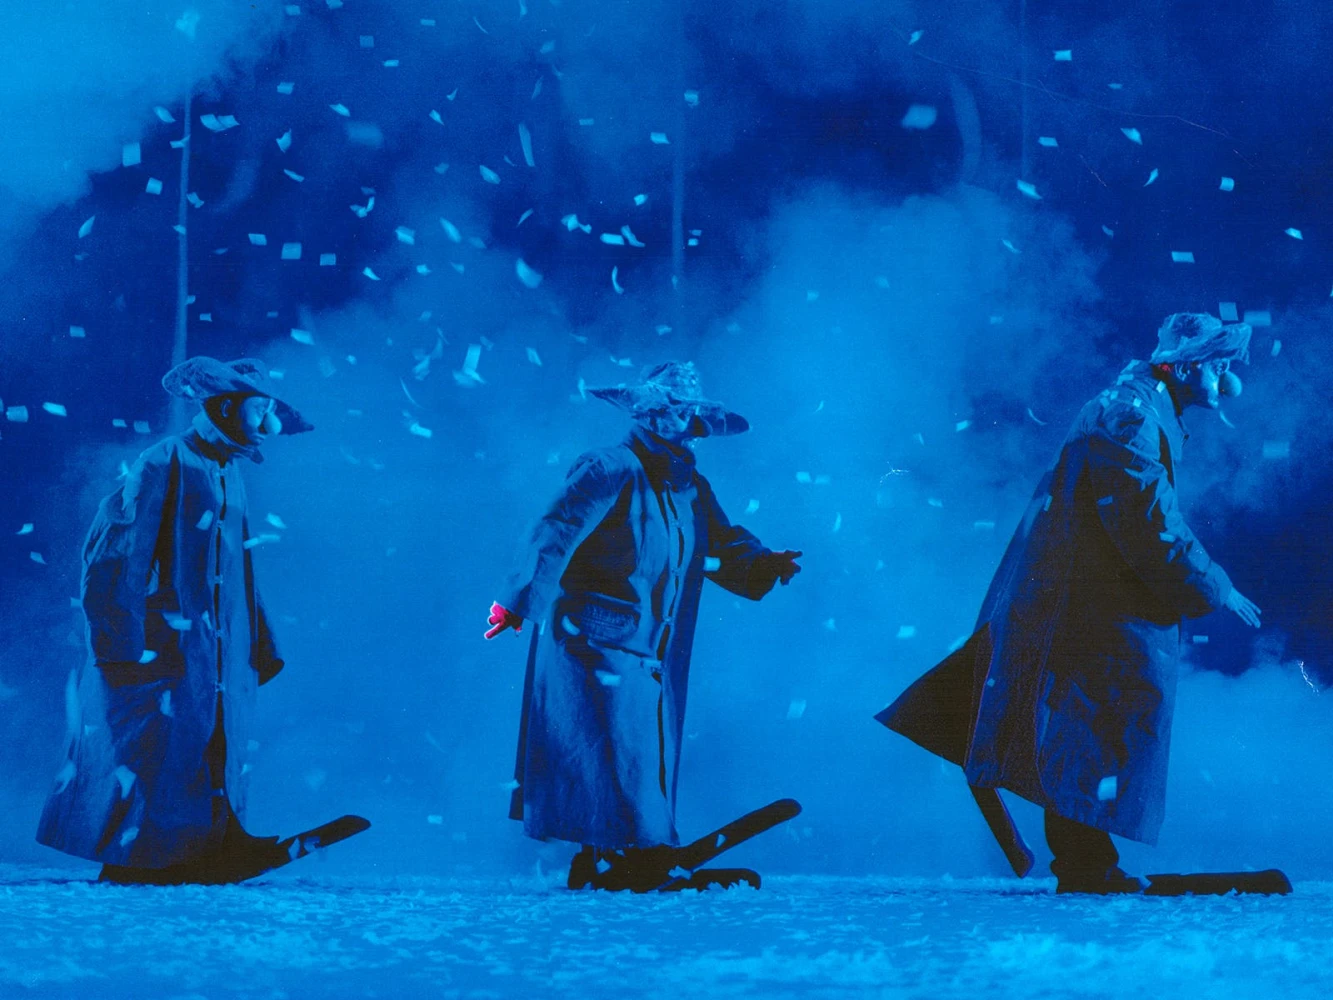 Slava's Snowshow: What to expect - 1